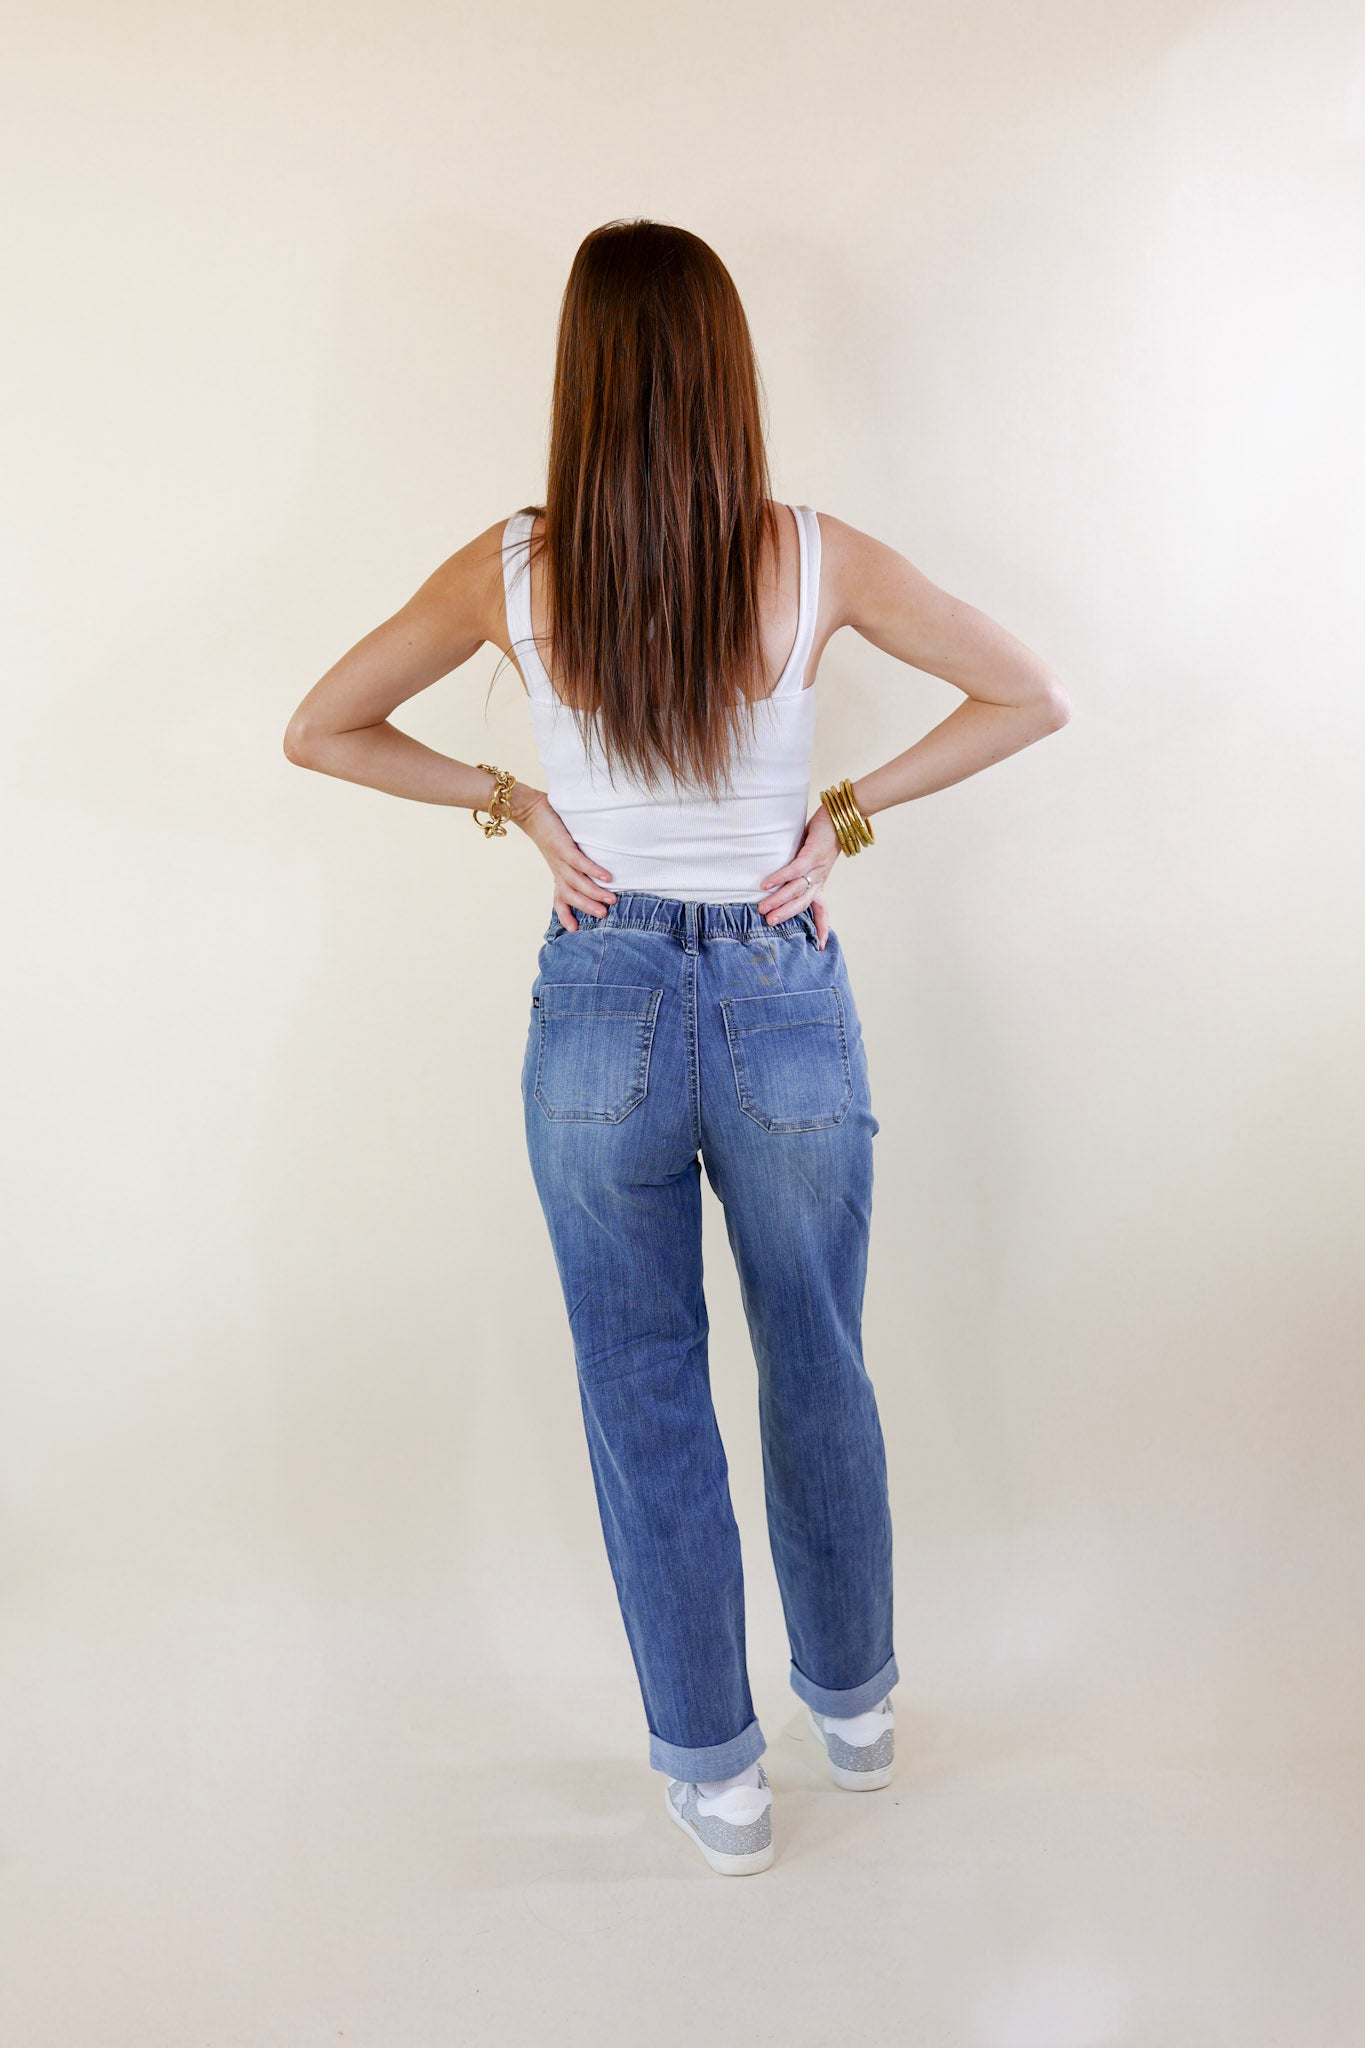 Judy Blue | Keep It A Secret Relaxed Pull on Jean Joggers with Cuffed Hem in Medium Wash - Giddy Up Glamour Boutique